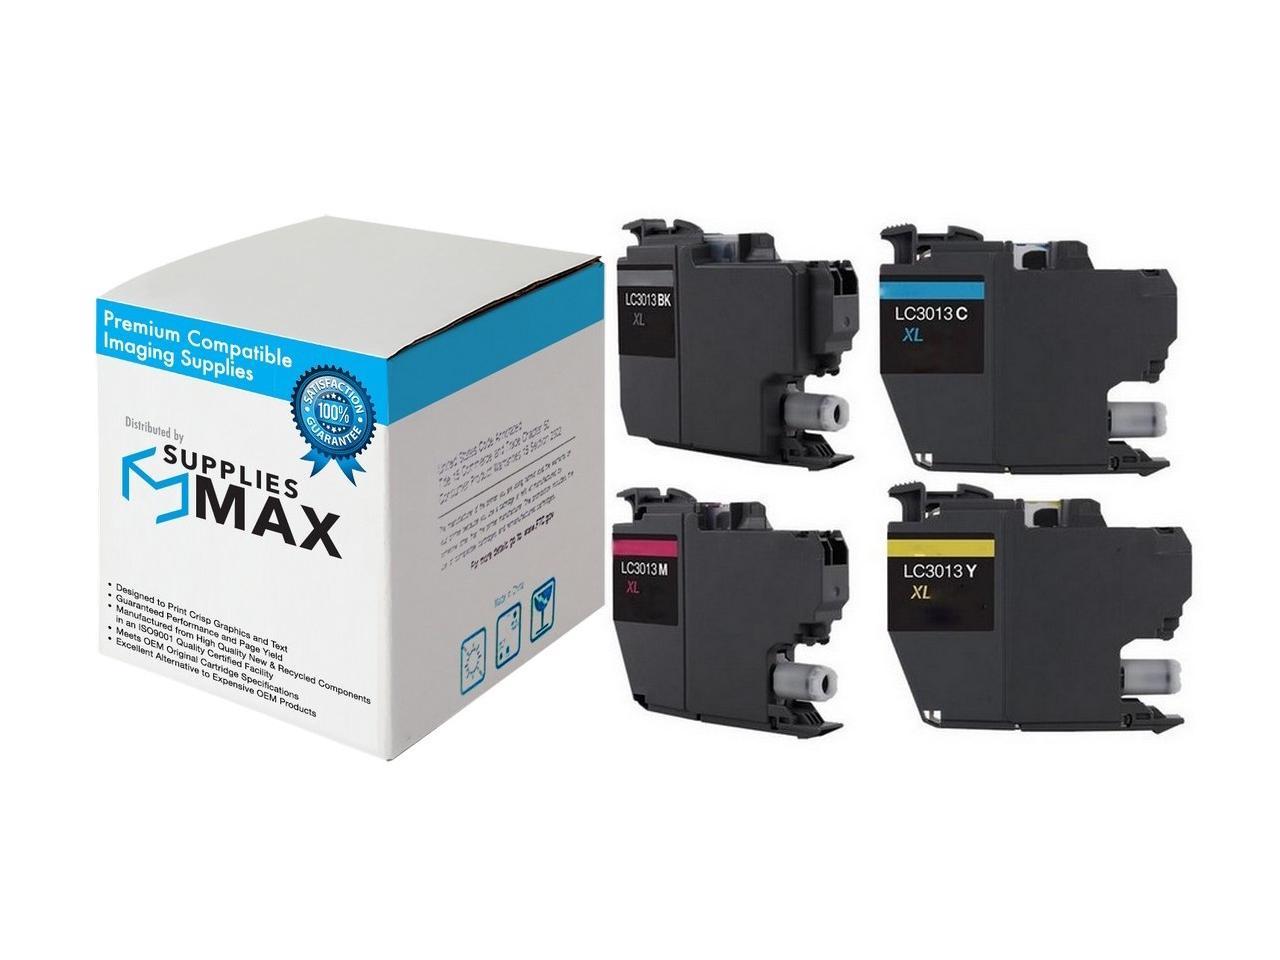 BK/C/M/Y SuppliesMAX Compatible Replacement for Brother DCP-J572/J772/J774/MFC-J491/J497/J690/J890/J895DW High Yield Inkjet Combo Pack LC-3011VALBP 